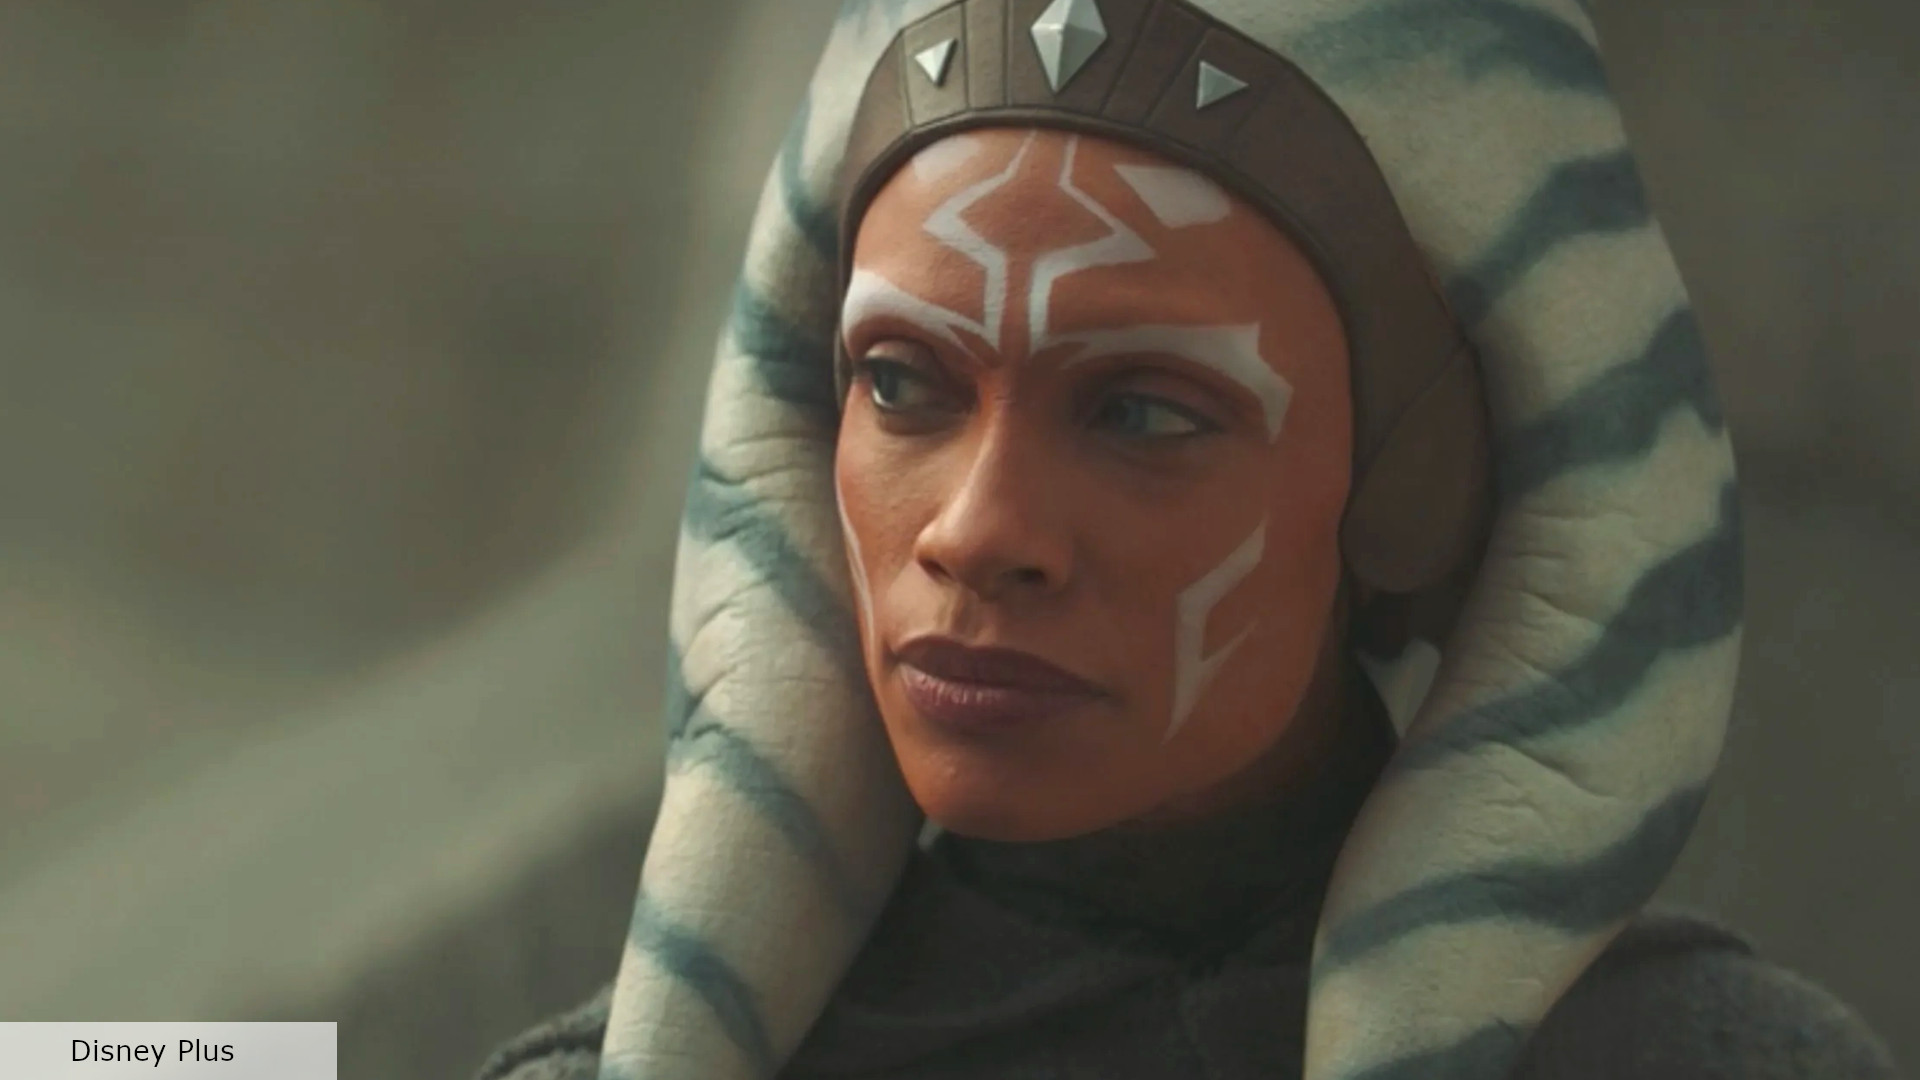 Star Wars Ahsoka release date gets exciting update from Rosario Dawson